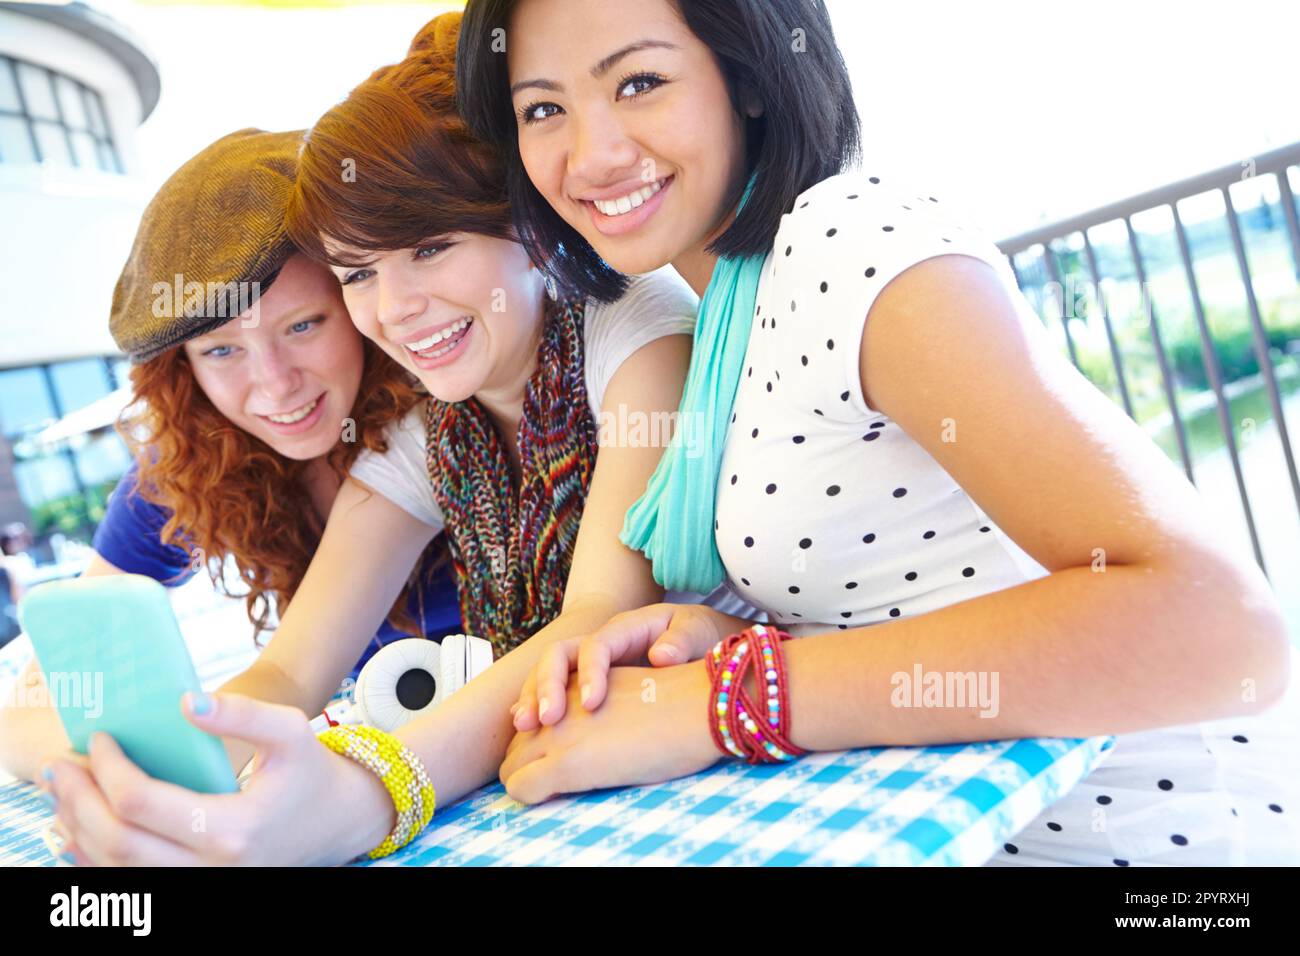 Were the online generation. A group of adolescent girls laughing as they look at something on a smartphone screen. Stock Photo